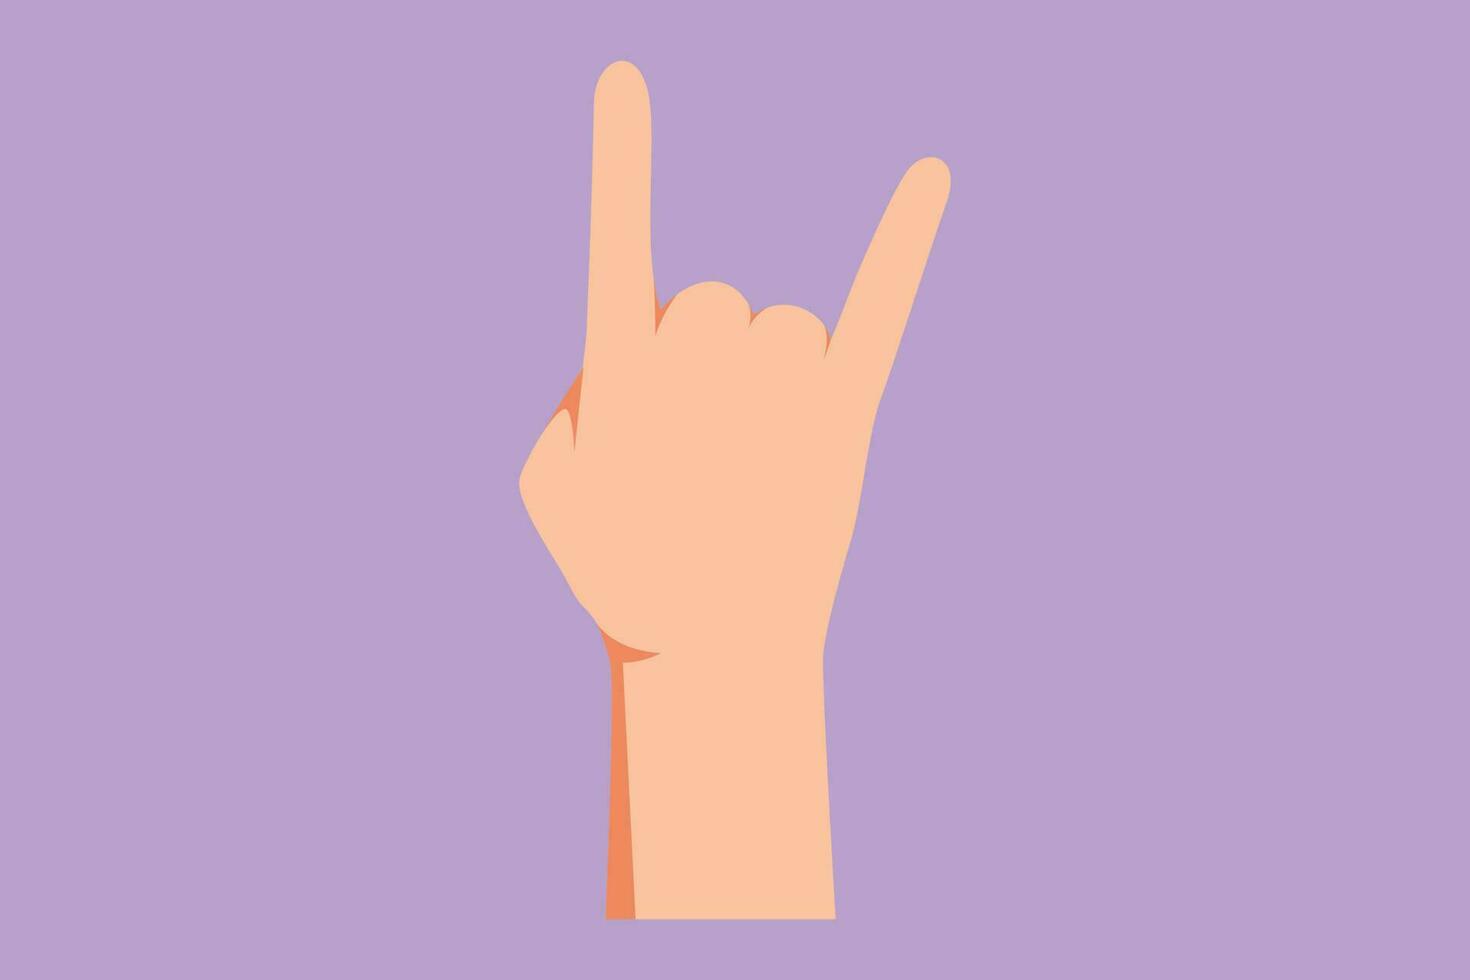 Graphic flat design drawing rock on gesture symbol. Heavy metal hand gesture. Nonverbal signs or symbols. Hand variation shape concept. Rock n roll band music icon. Cartoon style vector illustration